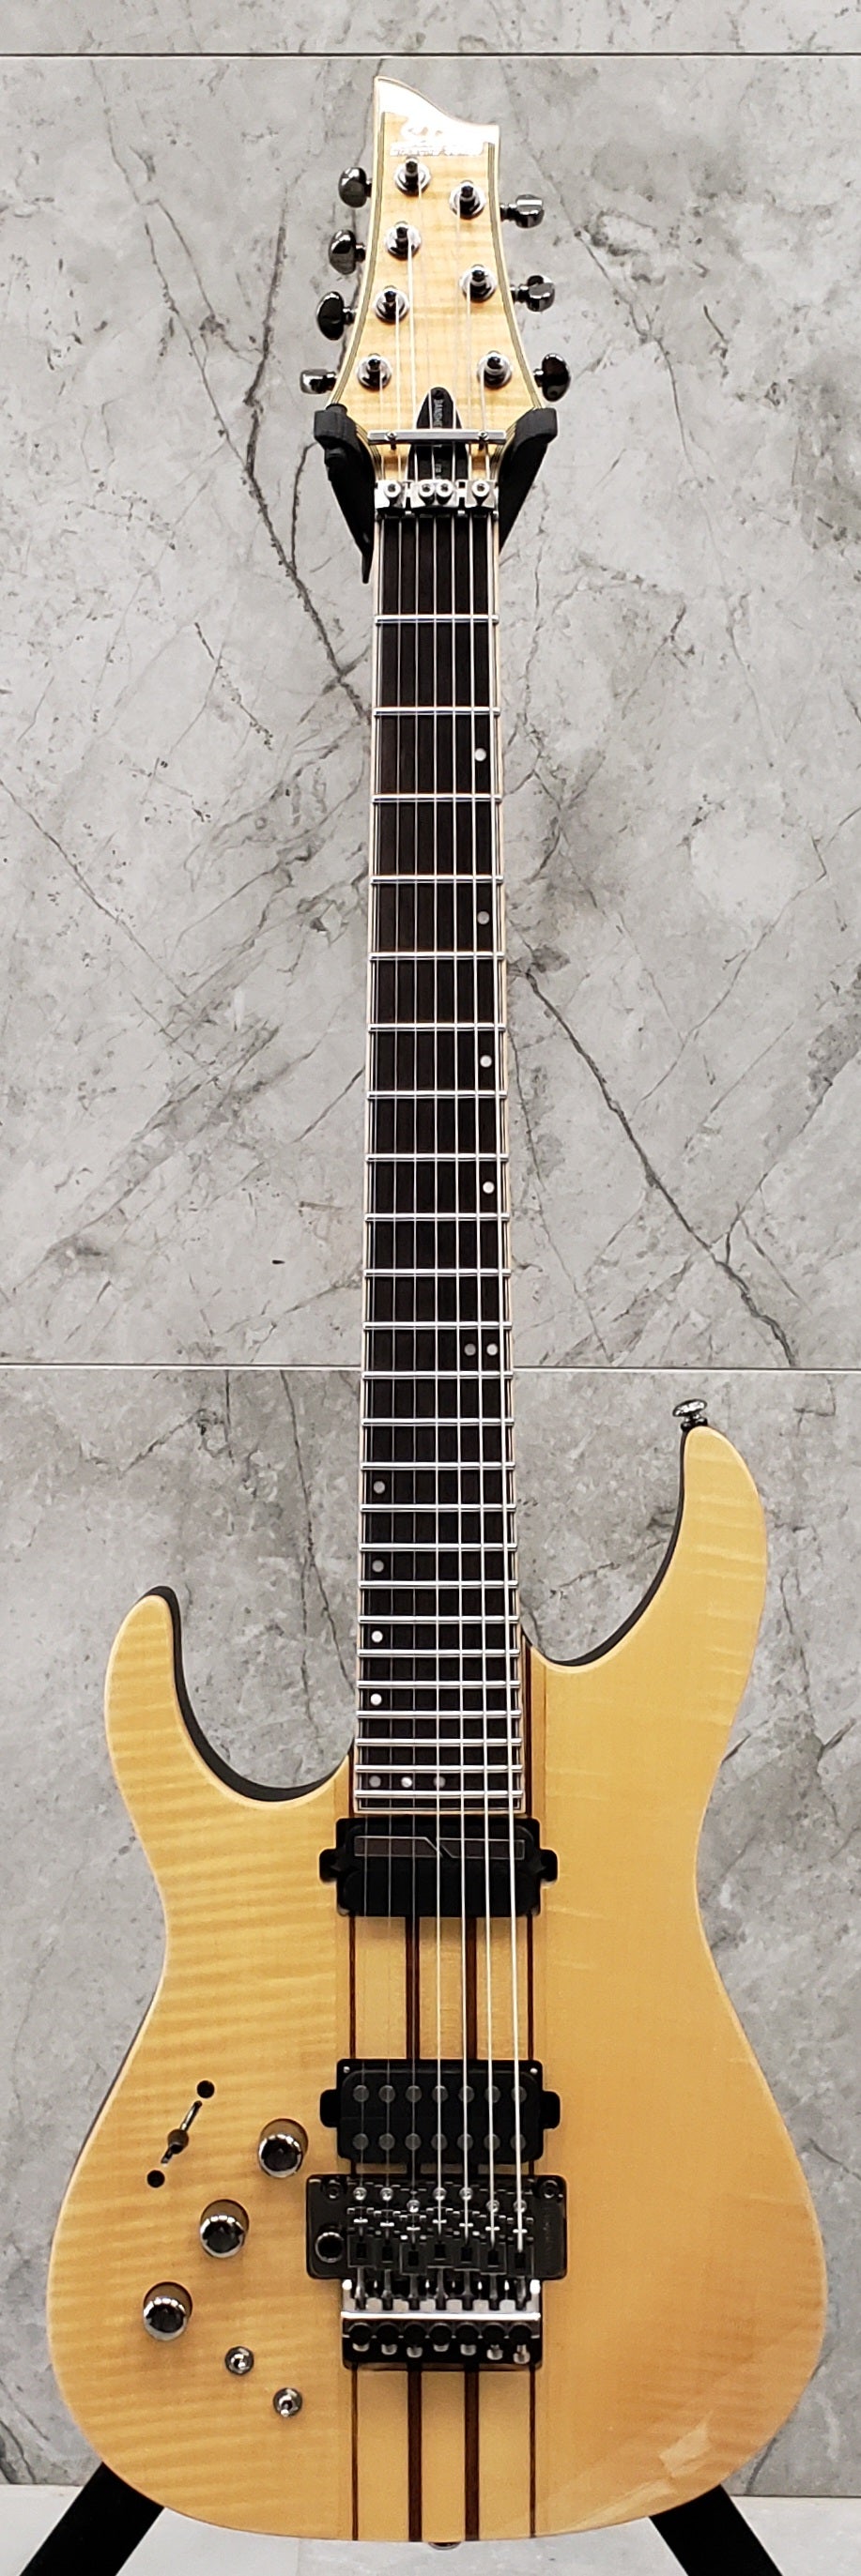 Schecter BANSHEE ELITE 7 FR S LH NATURAL LEFT HANDED Gloss Natural 7 String Guitar FR Sustainiac and Supercharger 1258-SHC SERIAL NUMBER W19033692 - 8.5 LBS